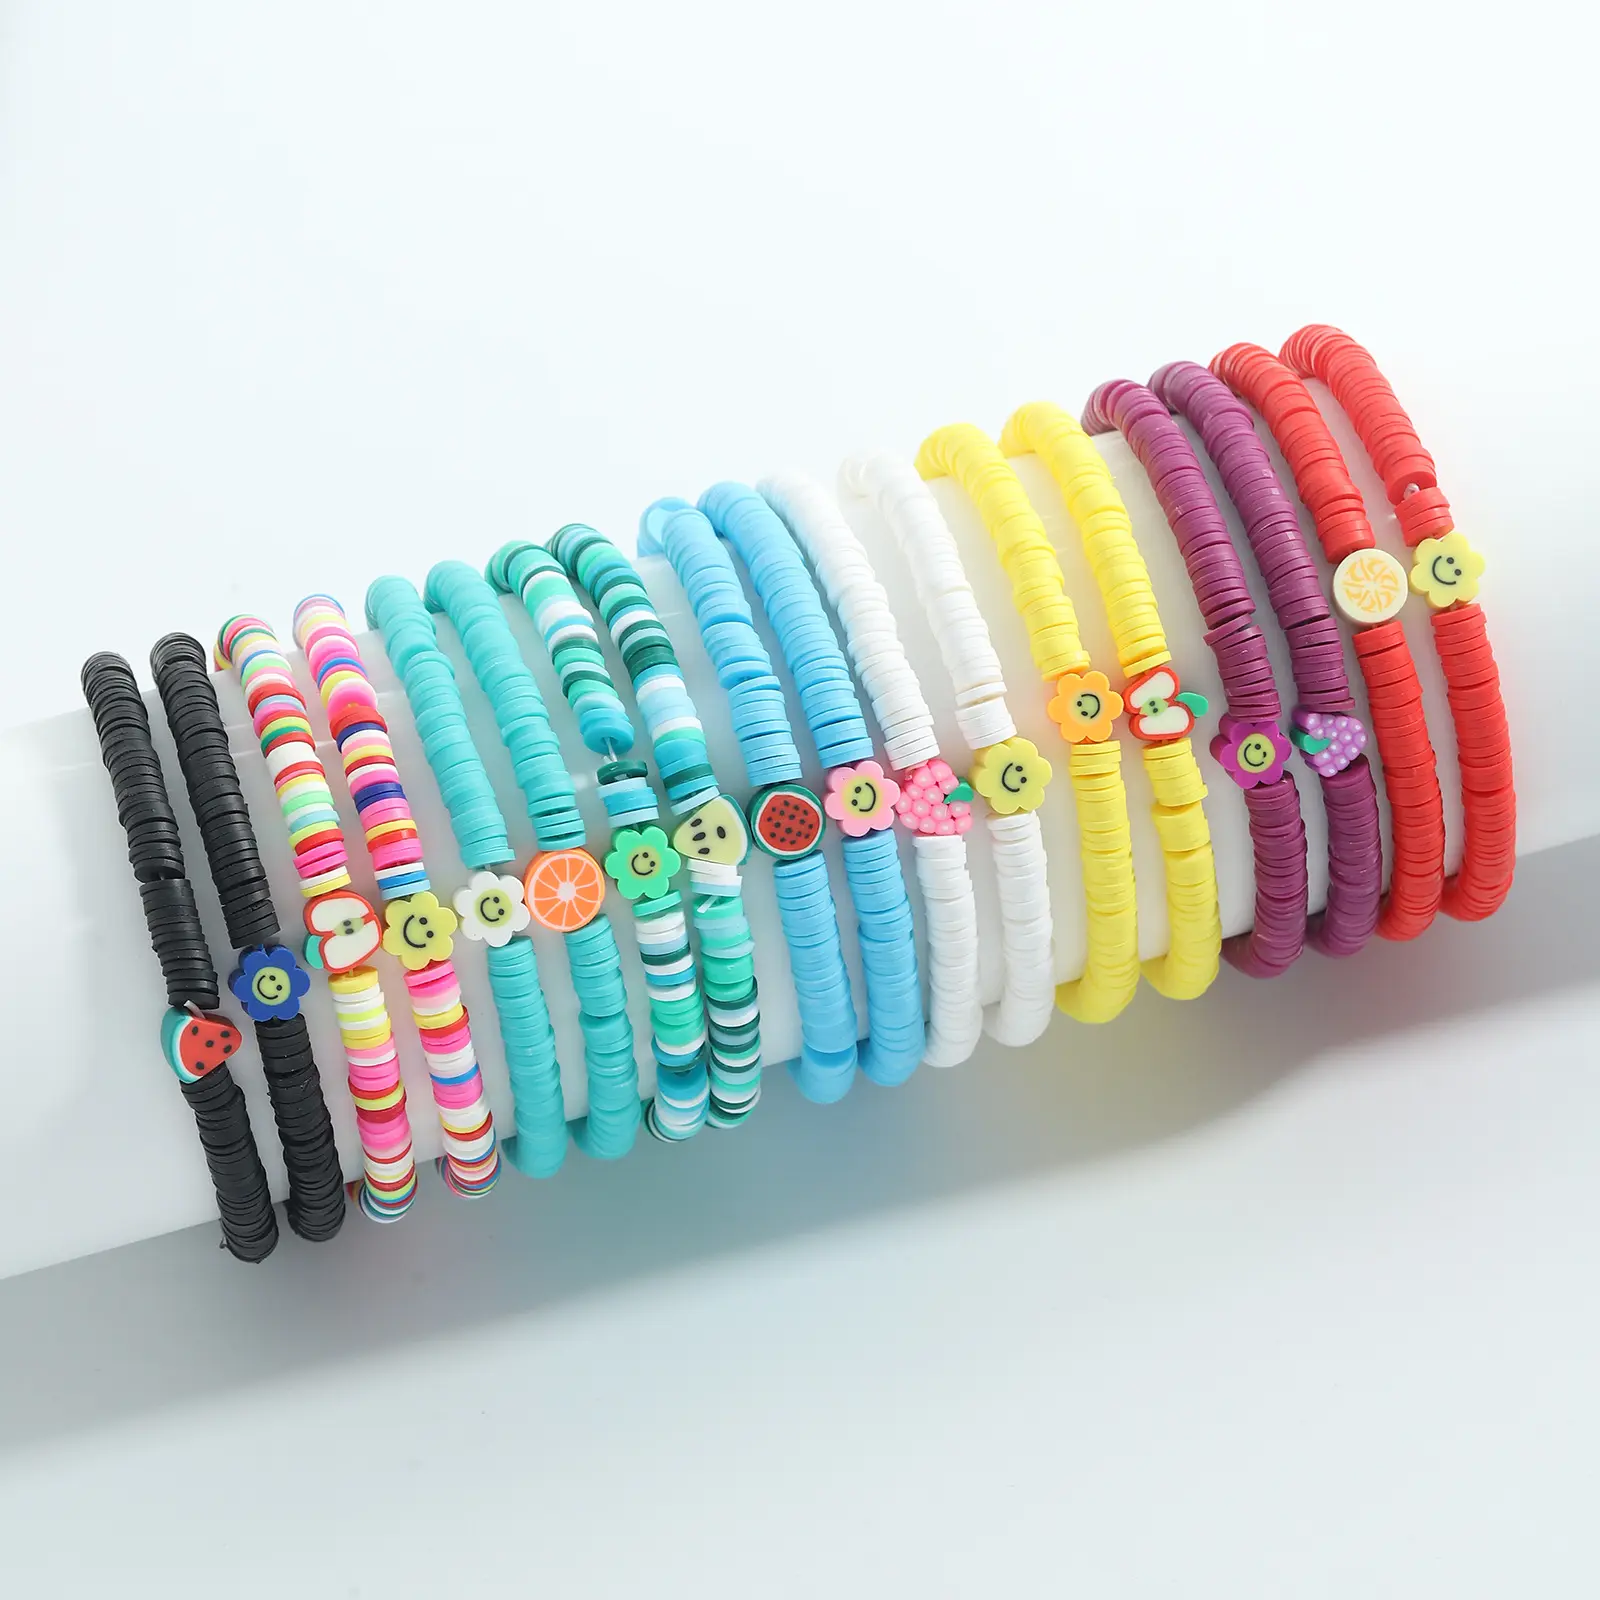 New Product Trend Handmade Soft Pottery Bracelet Creative Summer Personality Cute Fruit Smiley Face Bracelets Jewelry for Girls